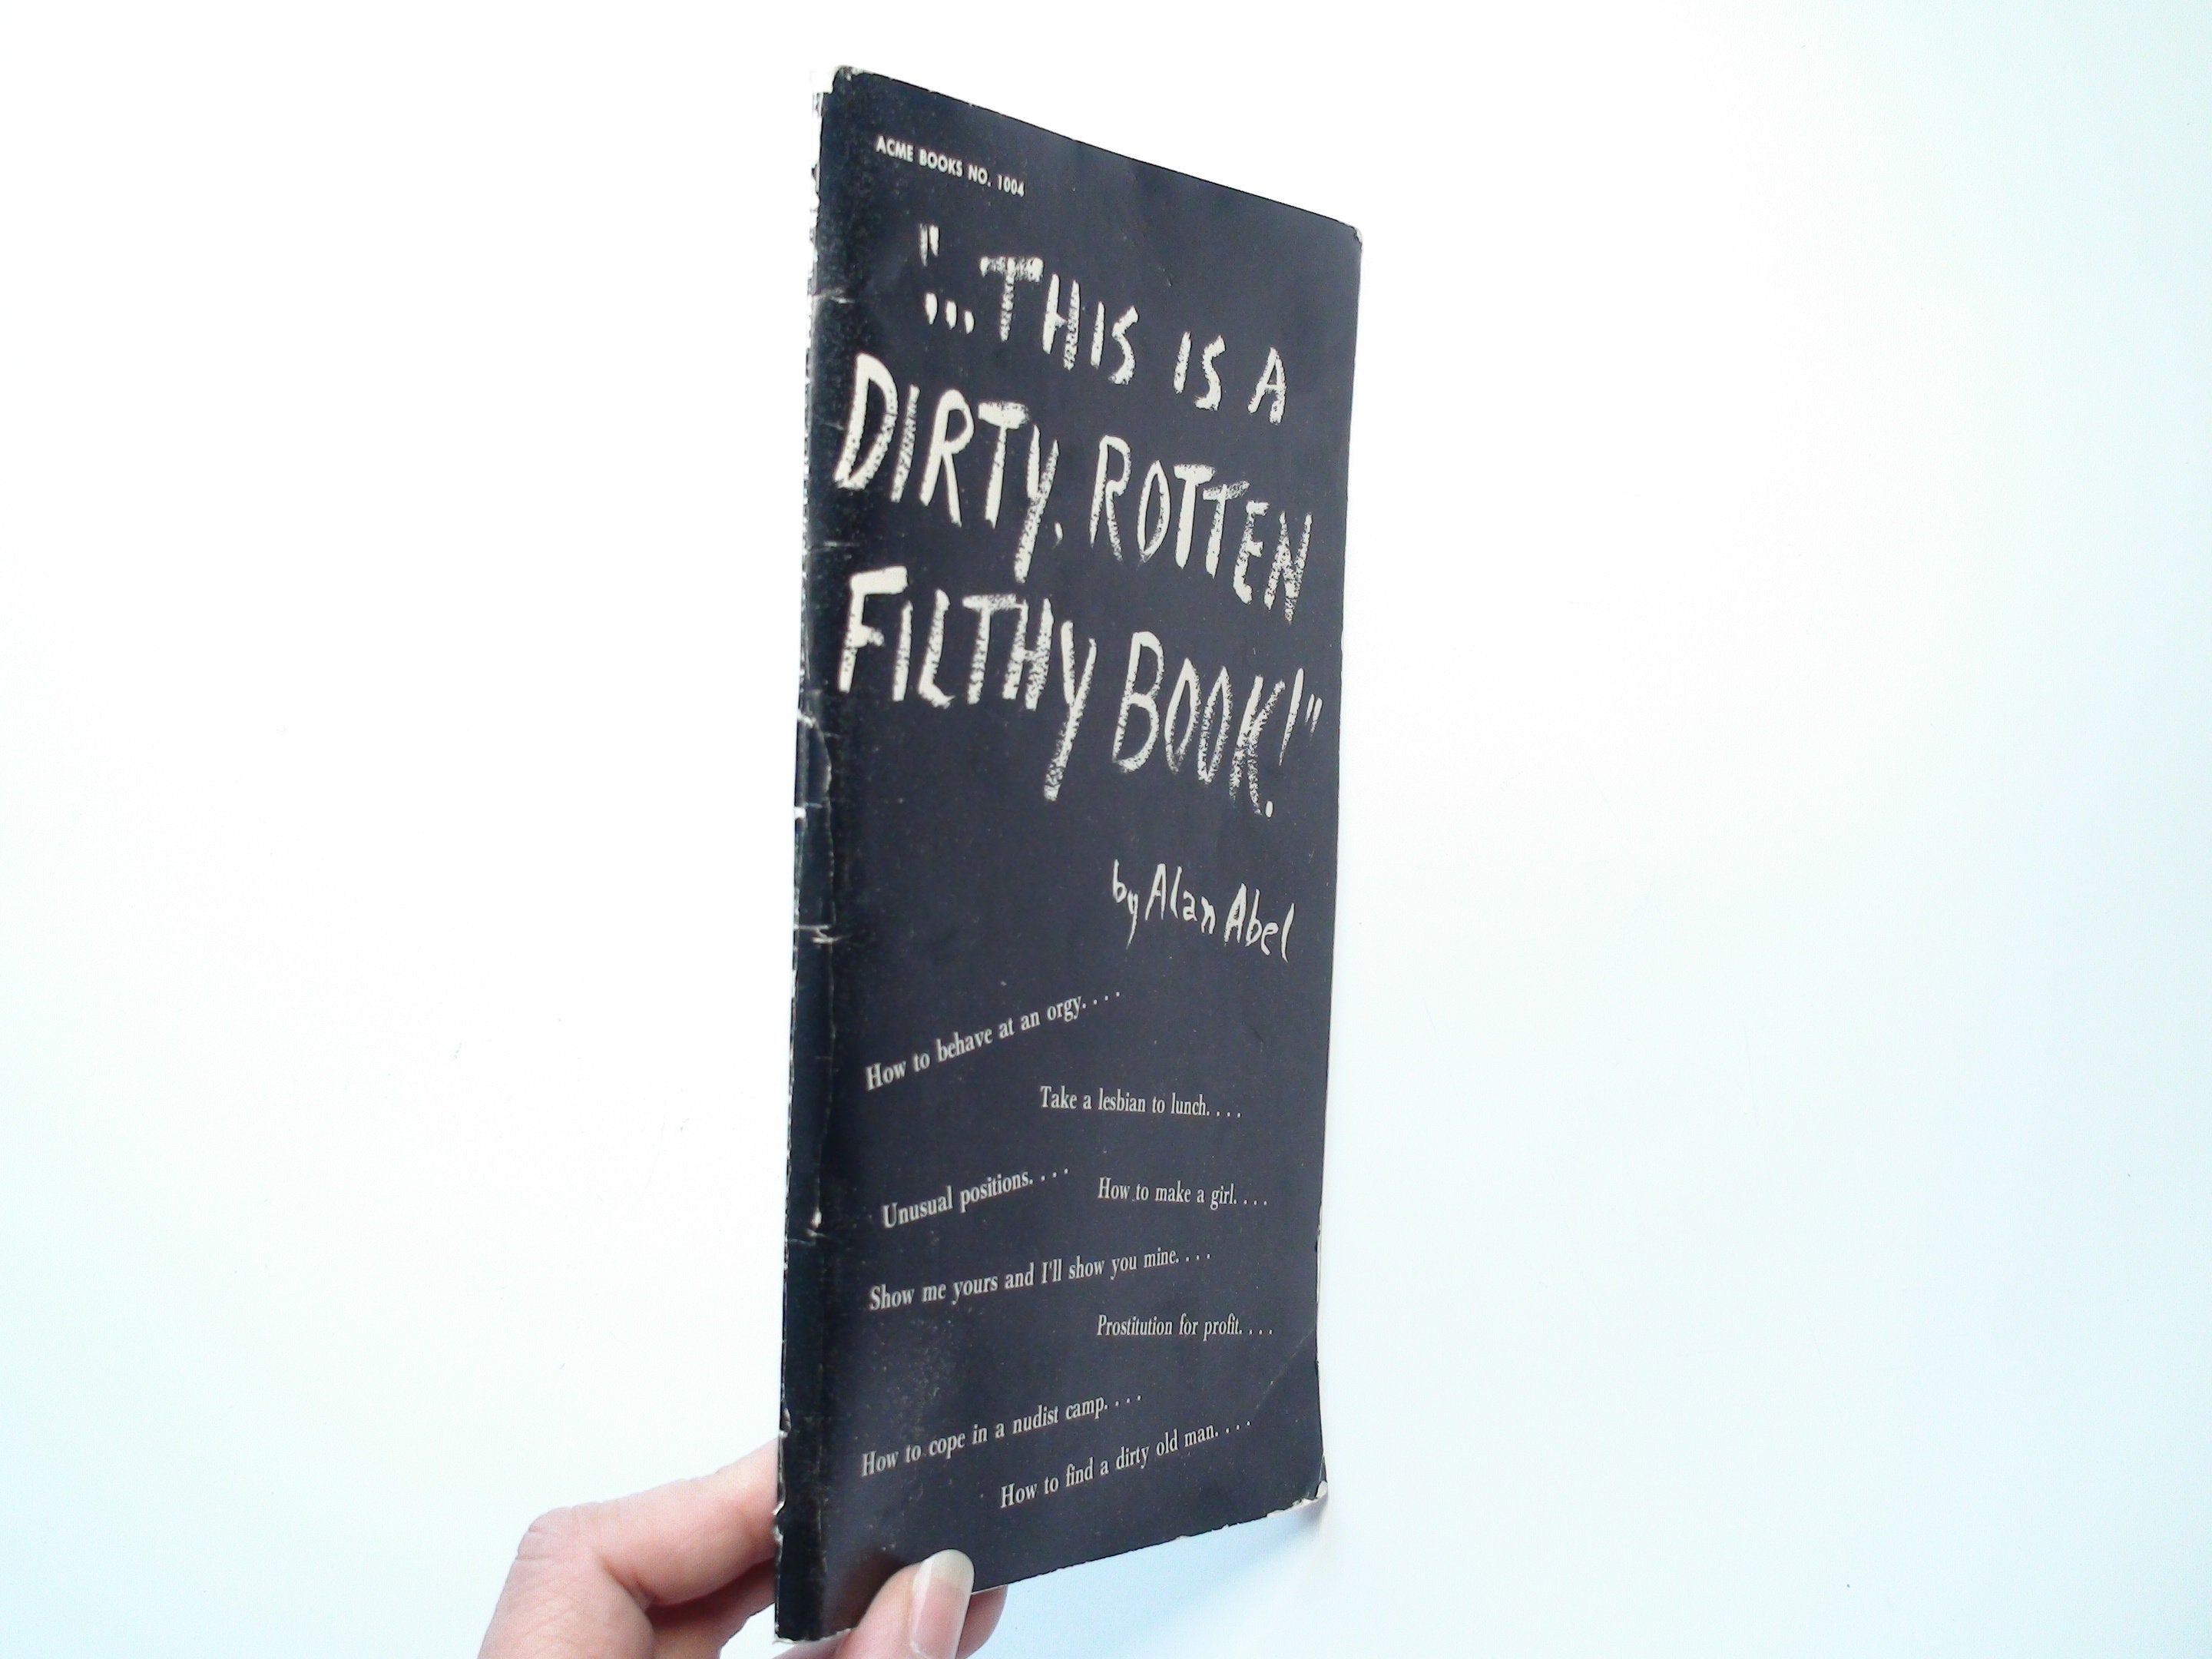 This is a Dirty, Rotten Filthy Book, Alan Abel, 1st Ed, Illustrated, 1968